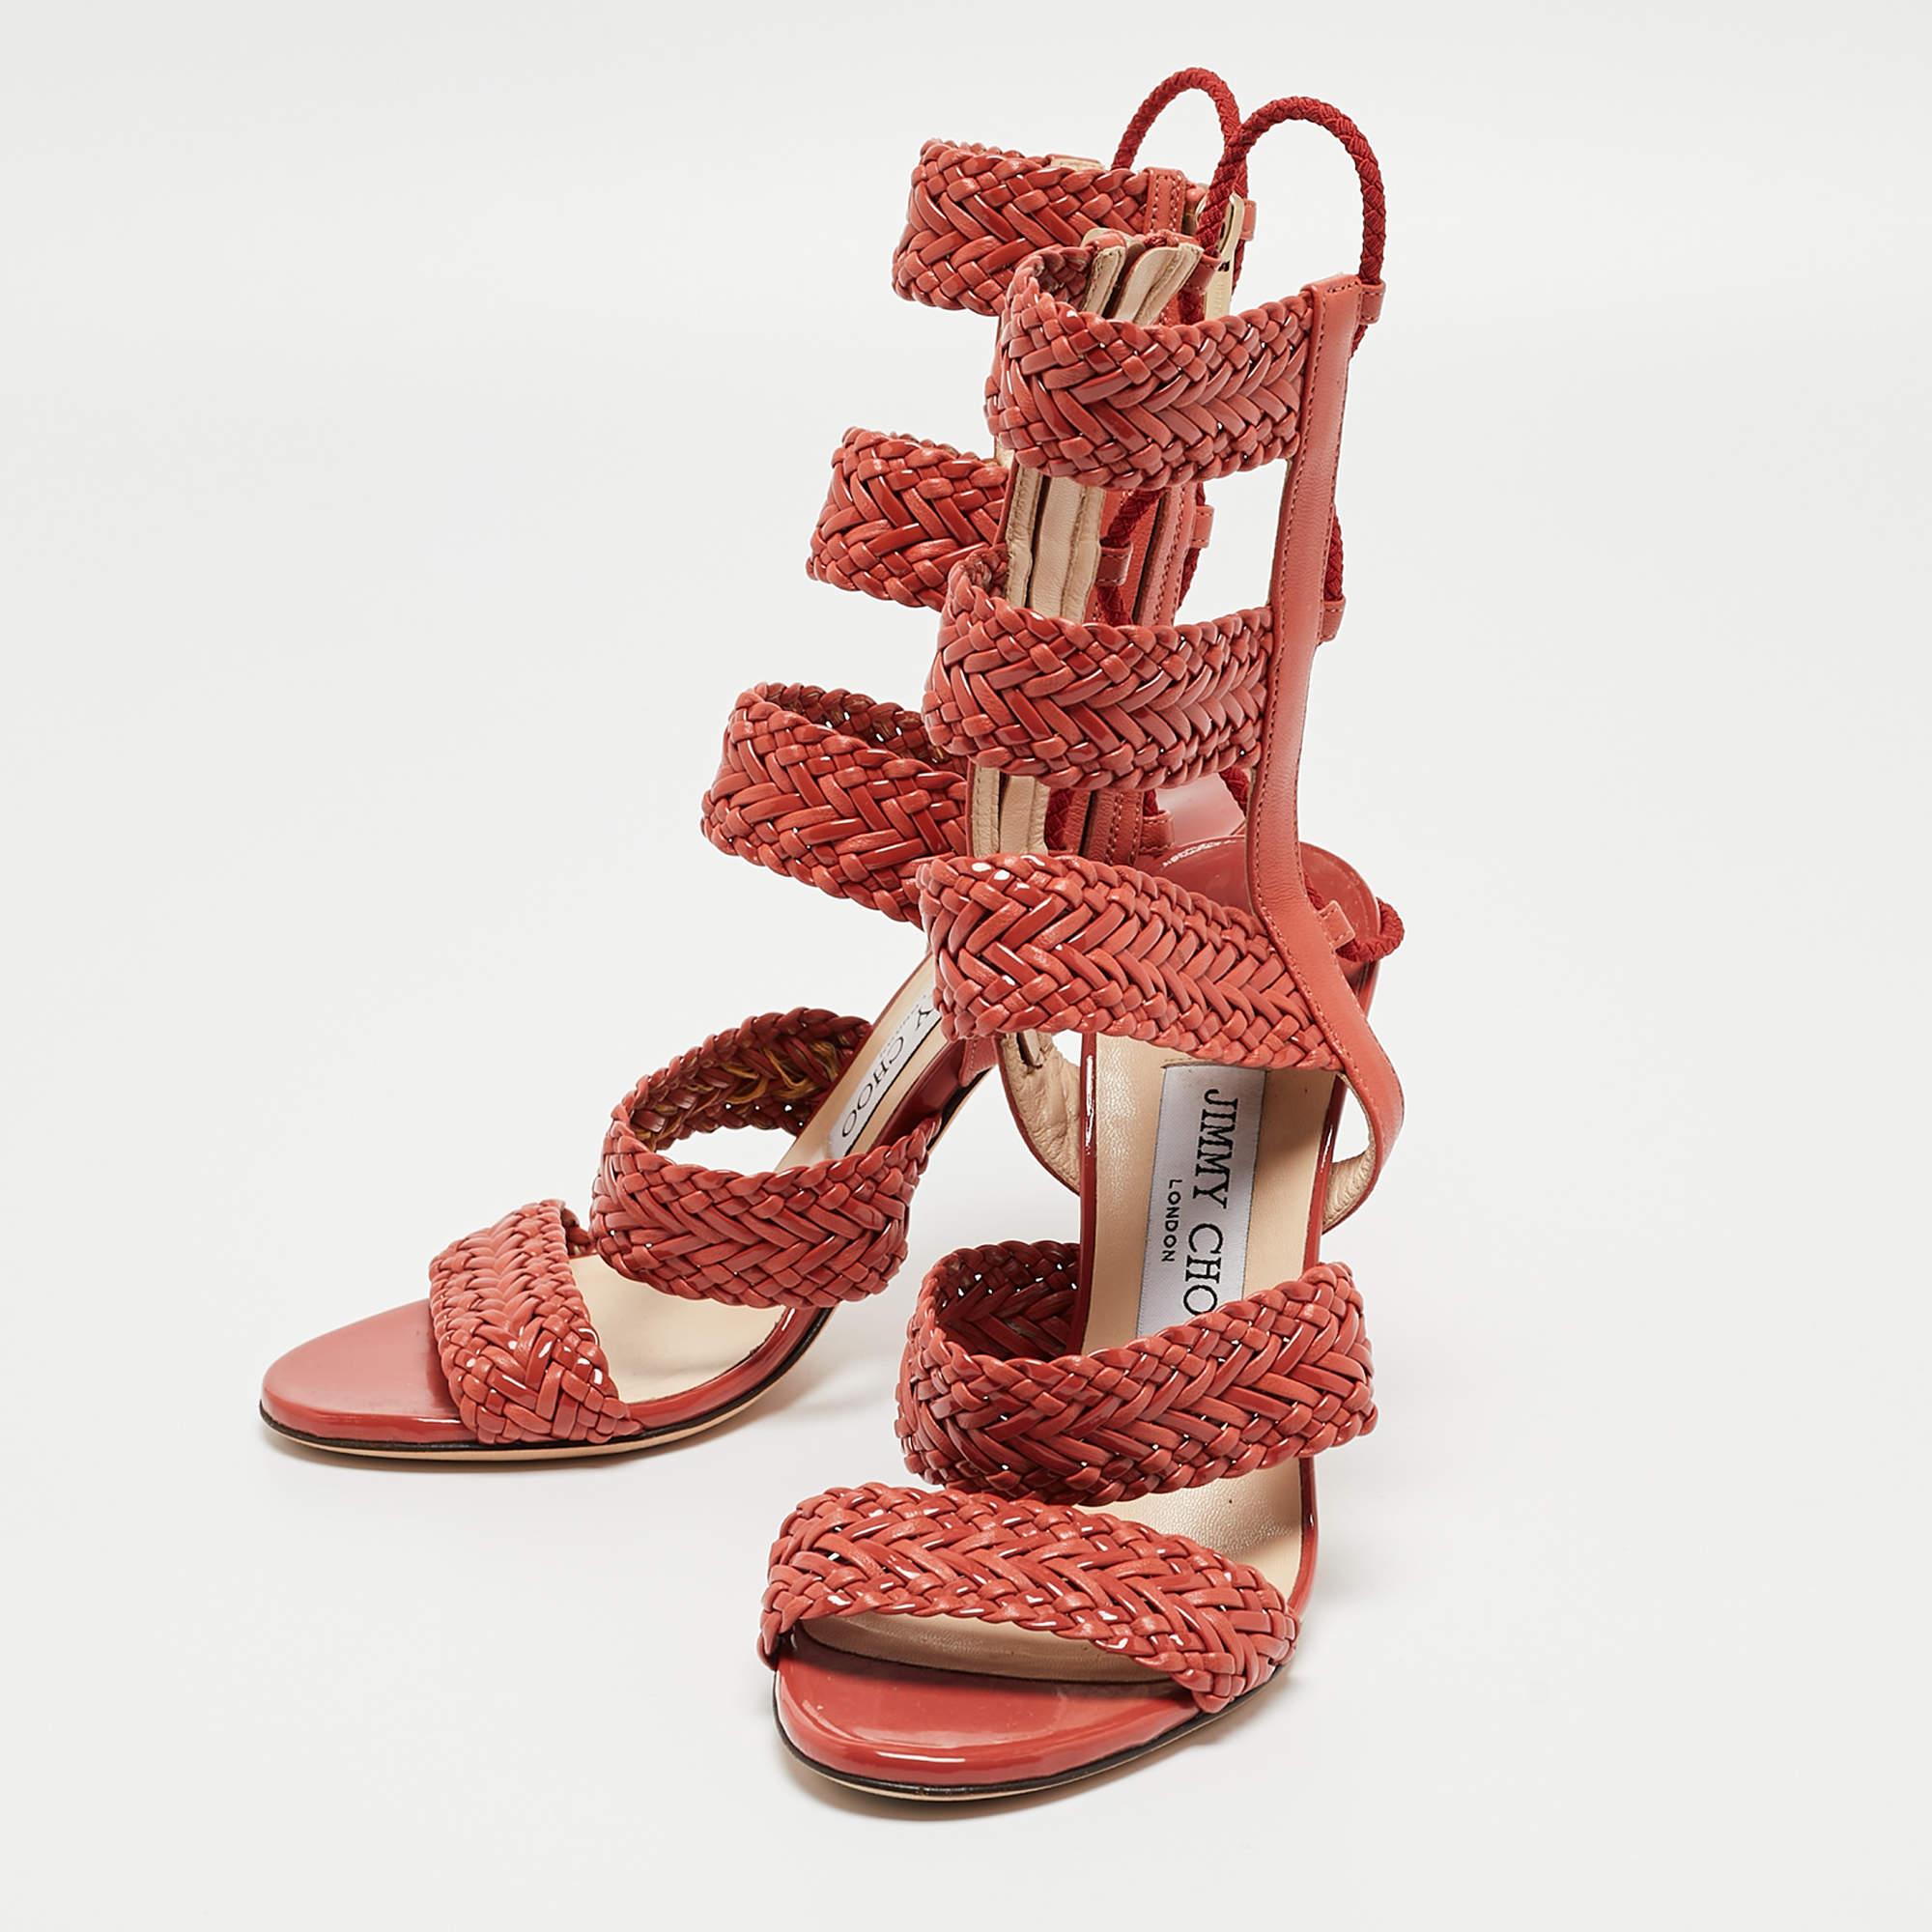 Wonderfully crafted shoes added with notable elements to fit well and pair perfectly with all your plans. Make these Jimmy Choo gladiator sandals yours today!

